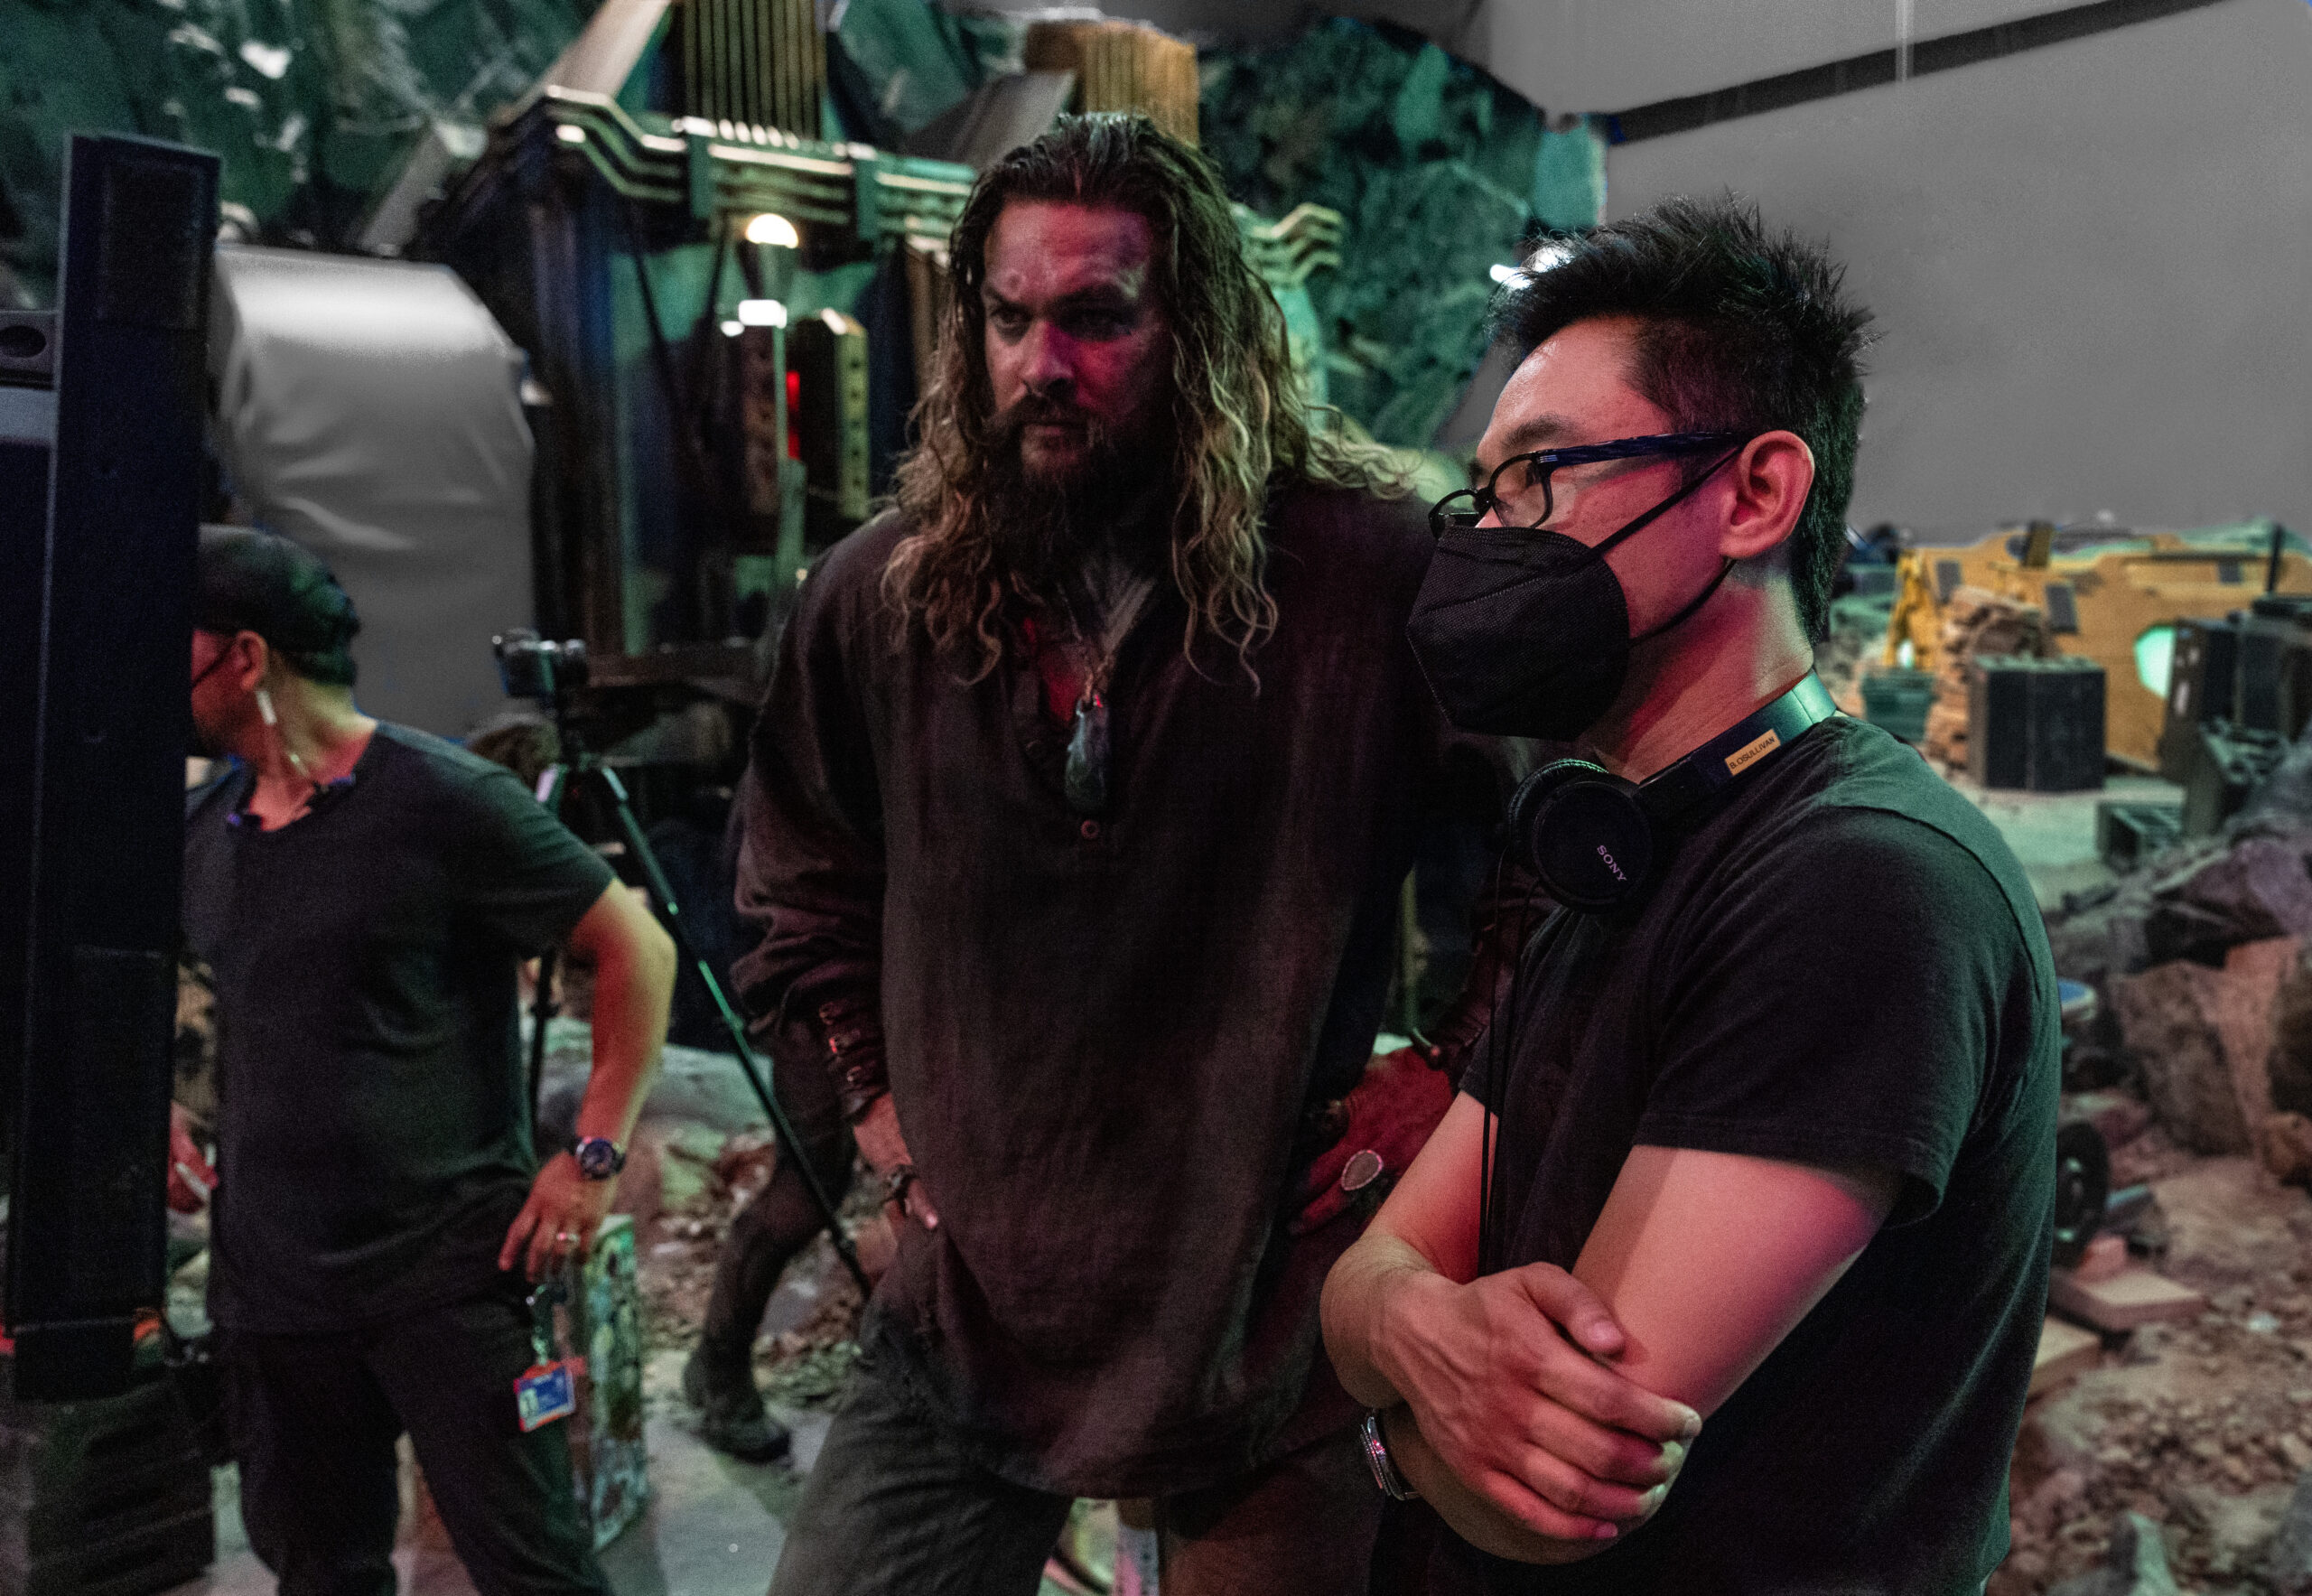 Go Behind-the-Scenes of AQUAMAN AND THE LOST KINGDOM with New Featurette About Director James Wan